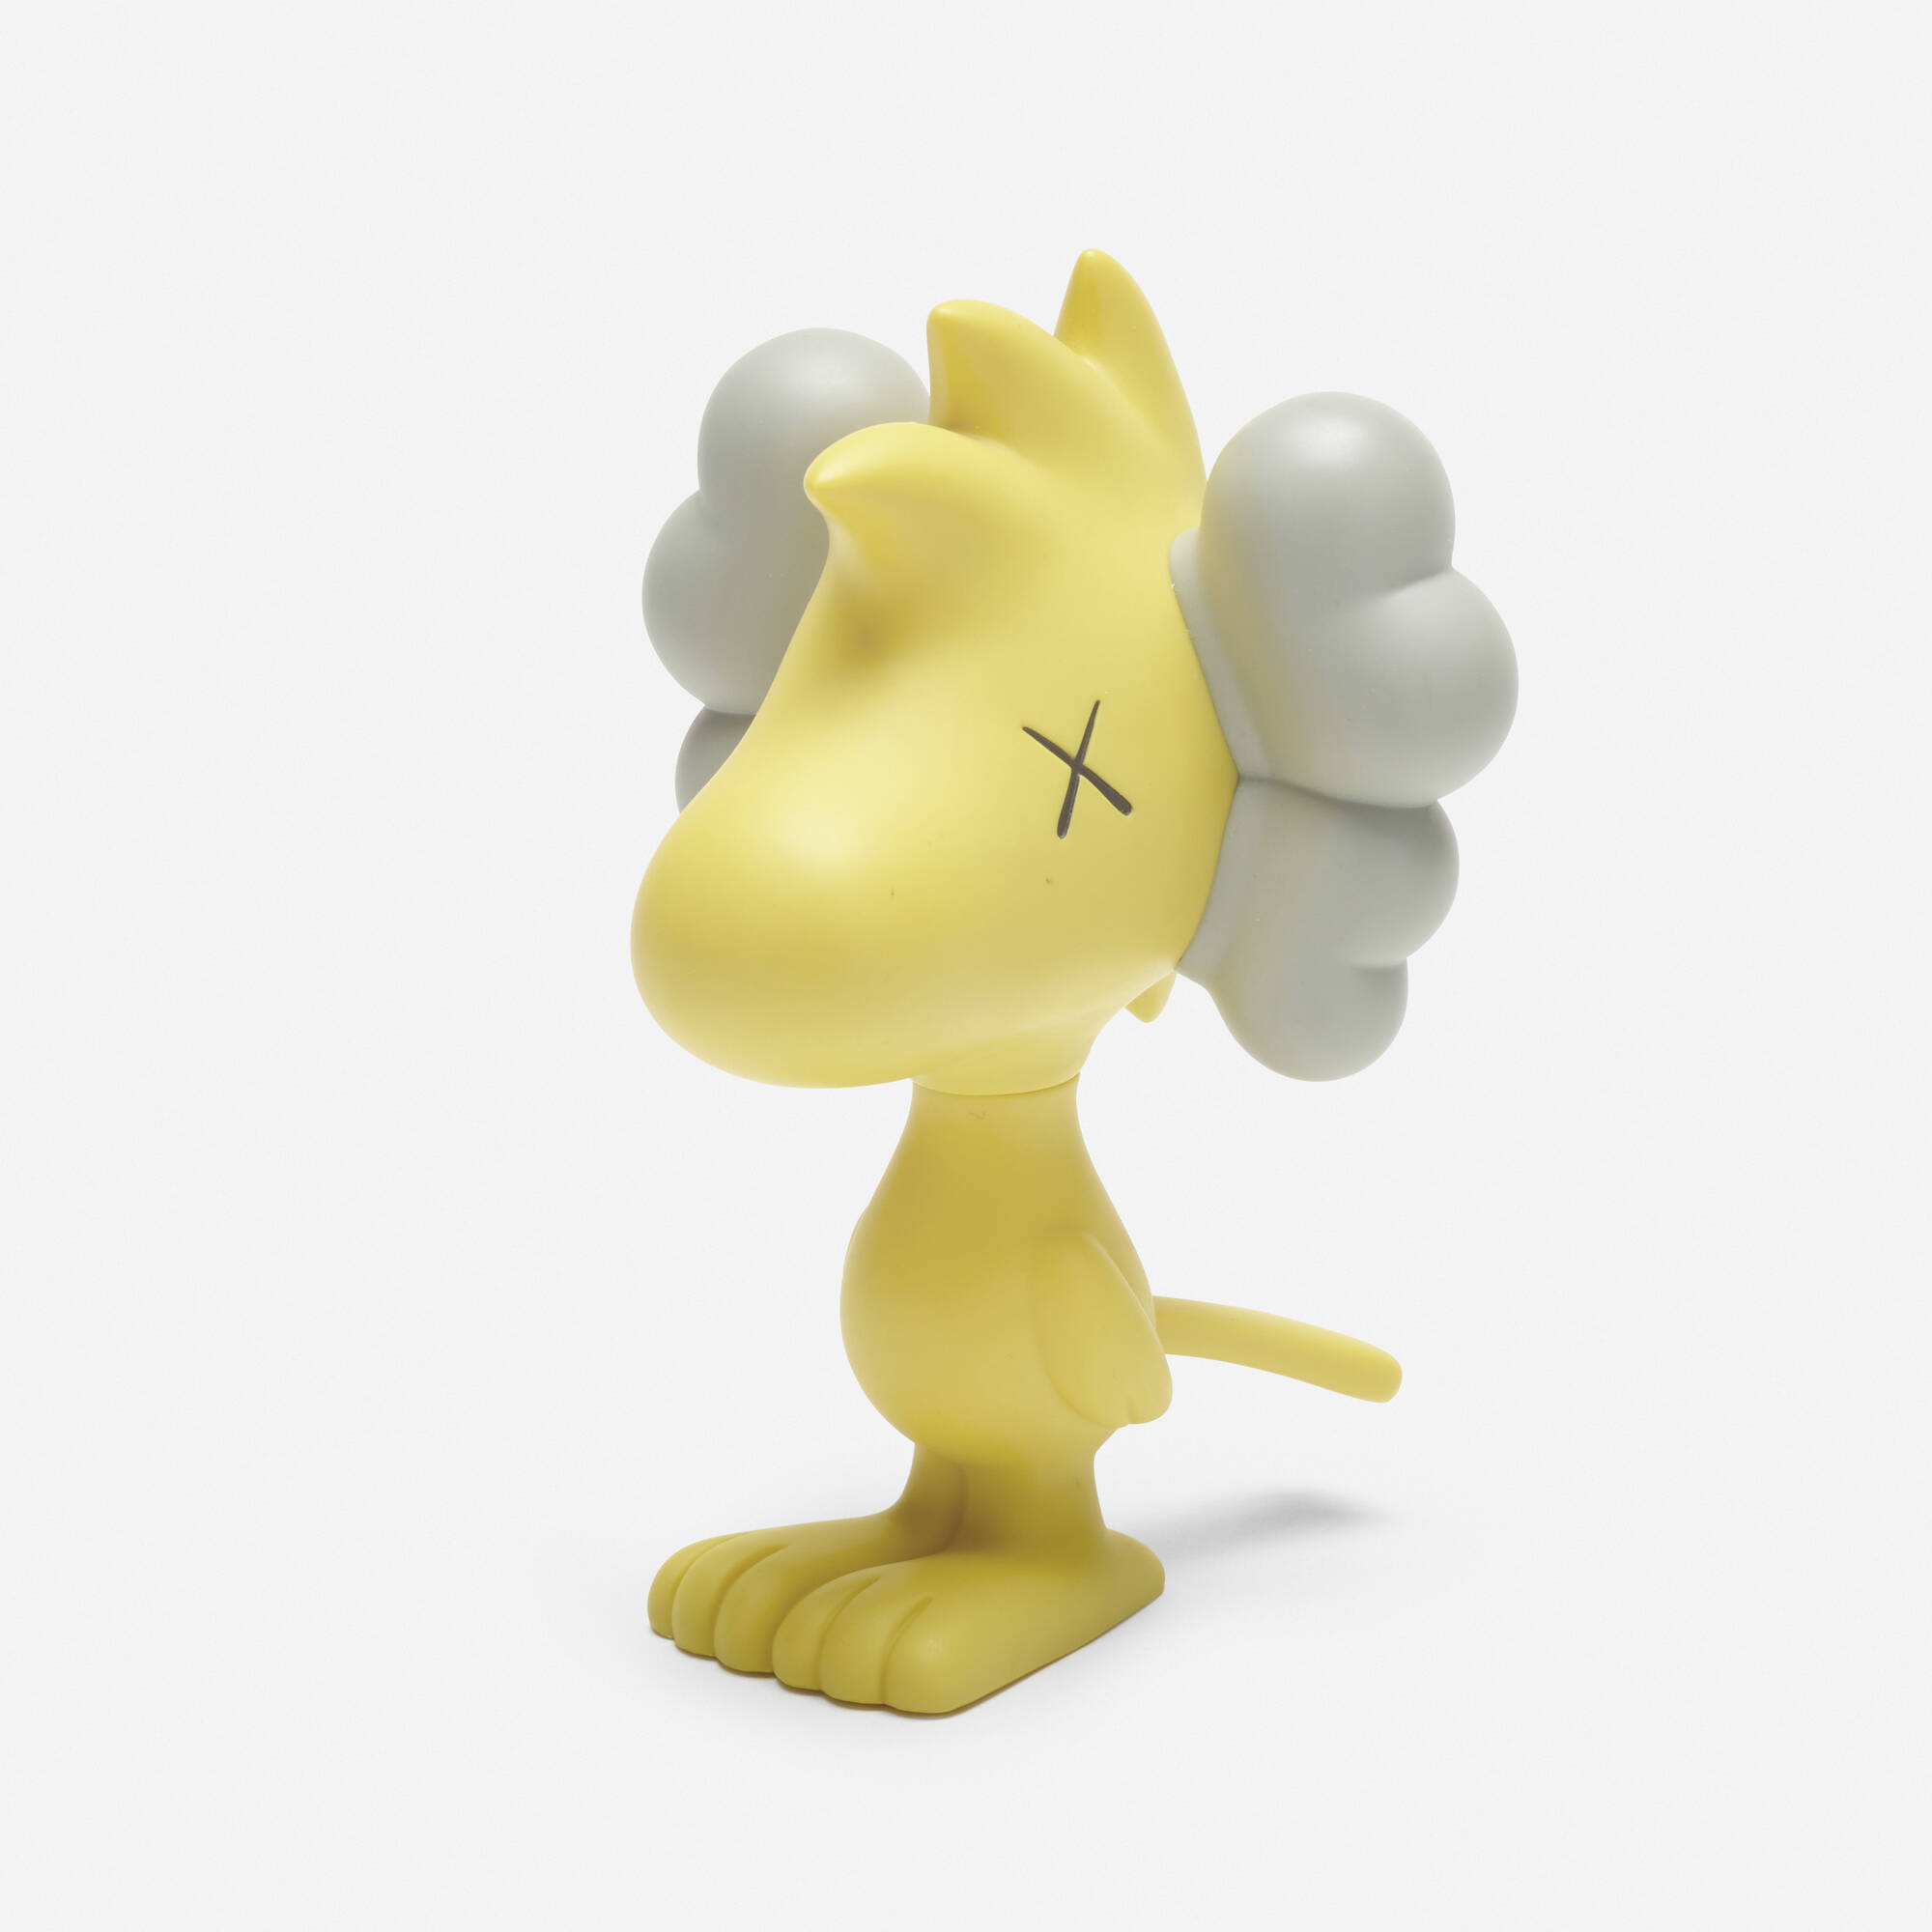 125: KAWS X PEANUTS, Woodstock < Unwrapped: Contemporary + 